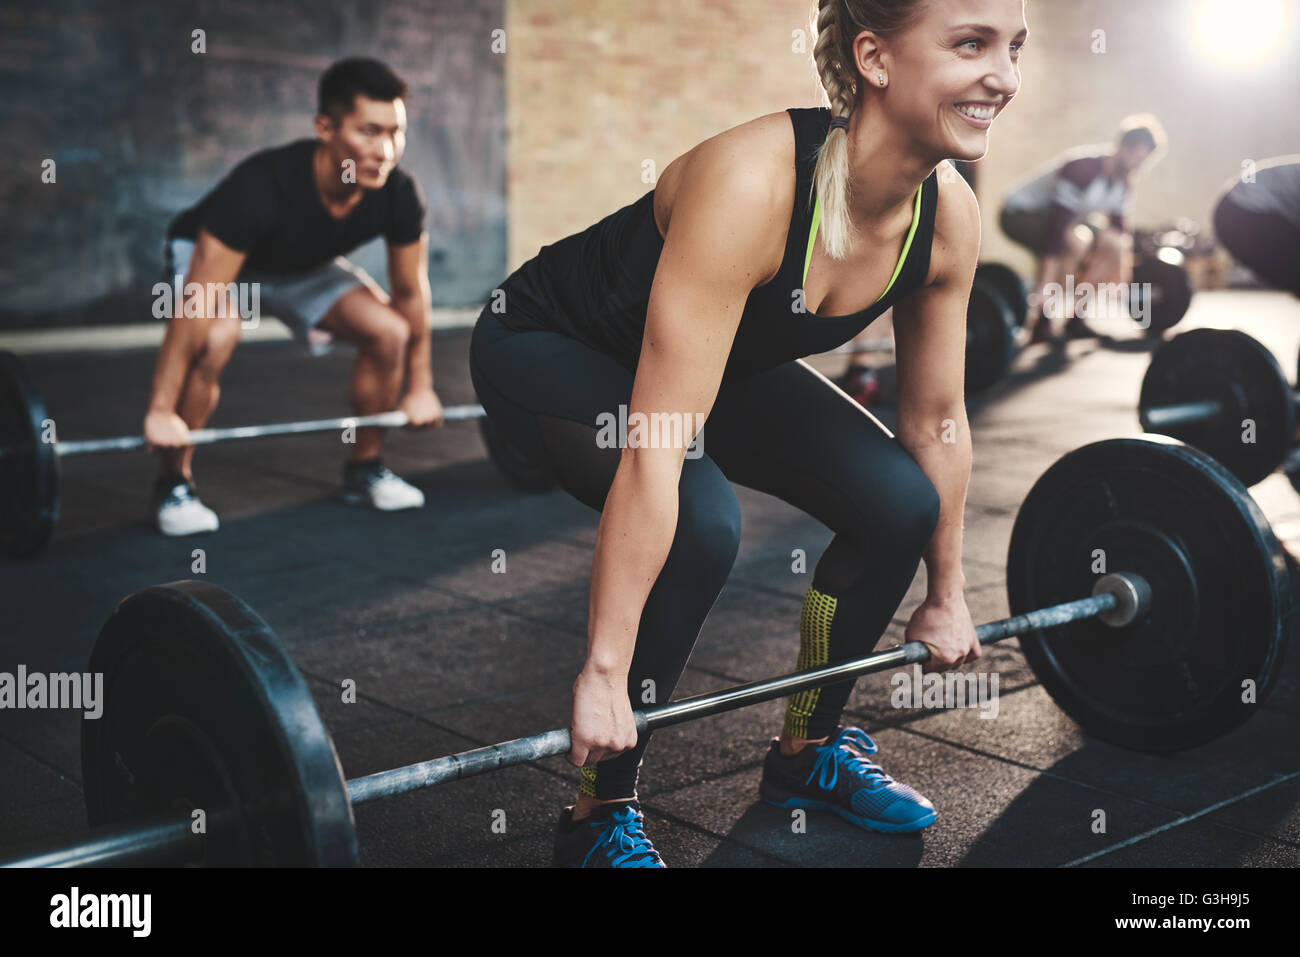 Cheerful muscular young woman with ponytail and black tights performing dead lift barbell exercises with other students Stock Photo